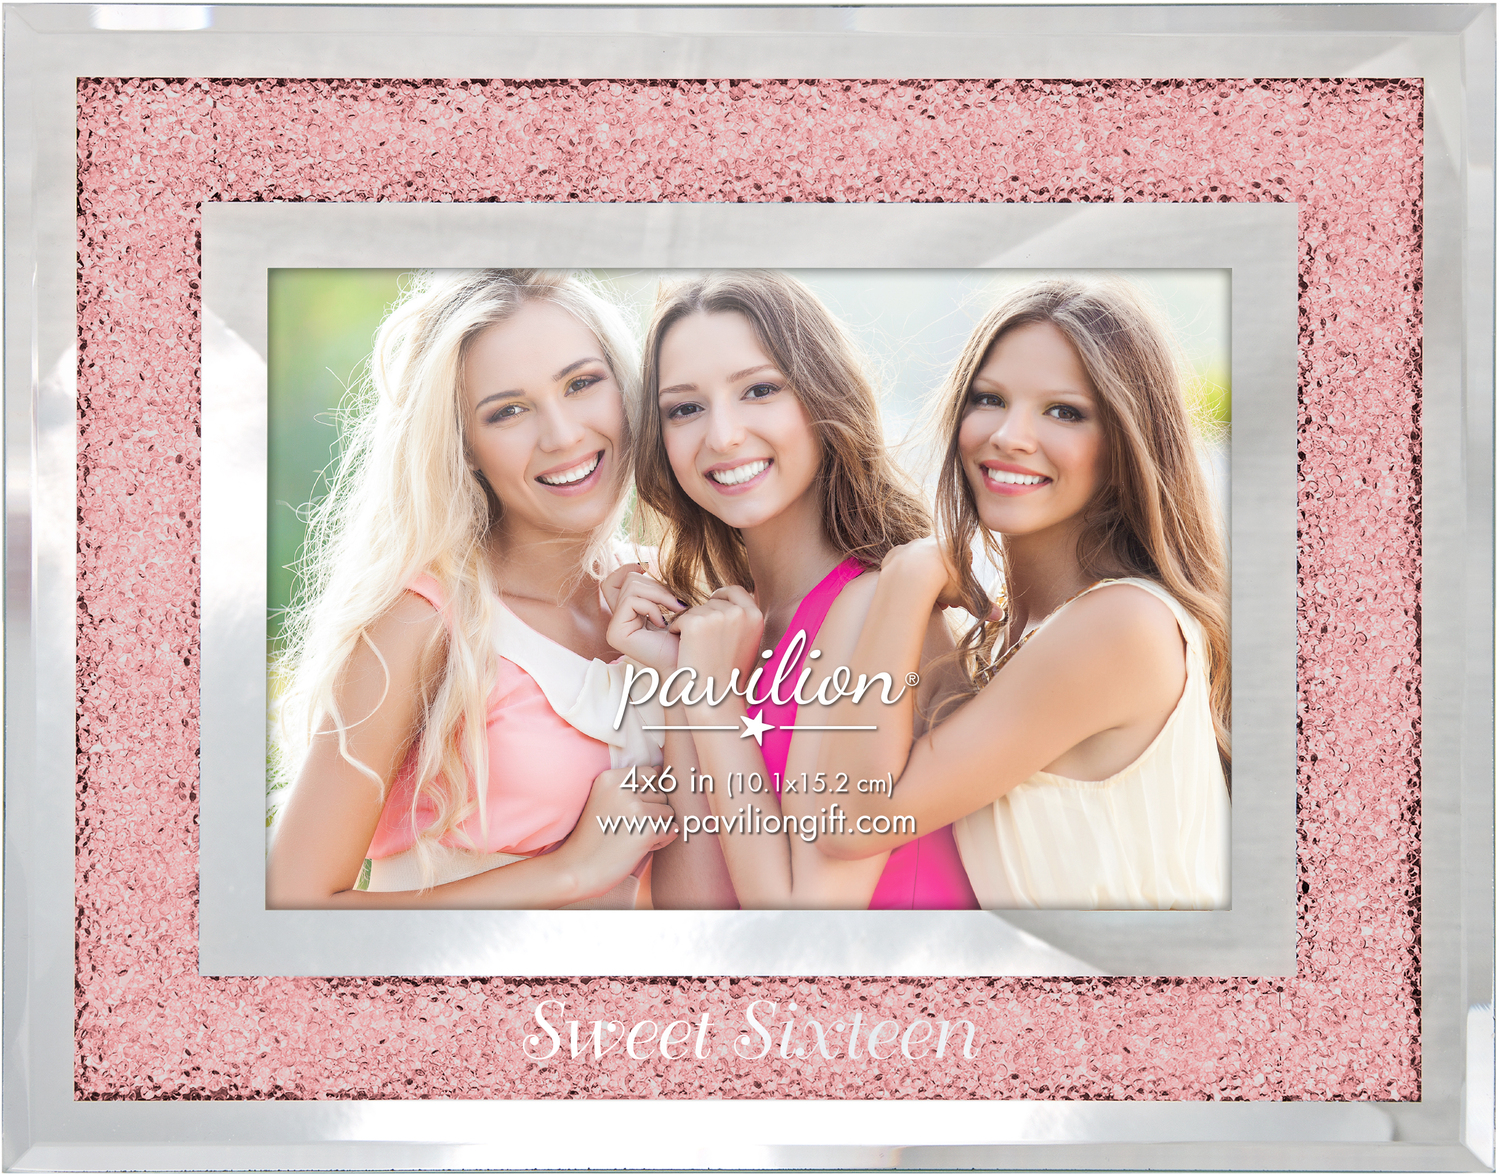 Sweet Sixteen by Glorious Occasions - Sweet Sixteen - 7.25" x 9.25" Frame
(Holds  4" x 6" Photo)